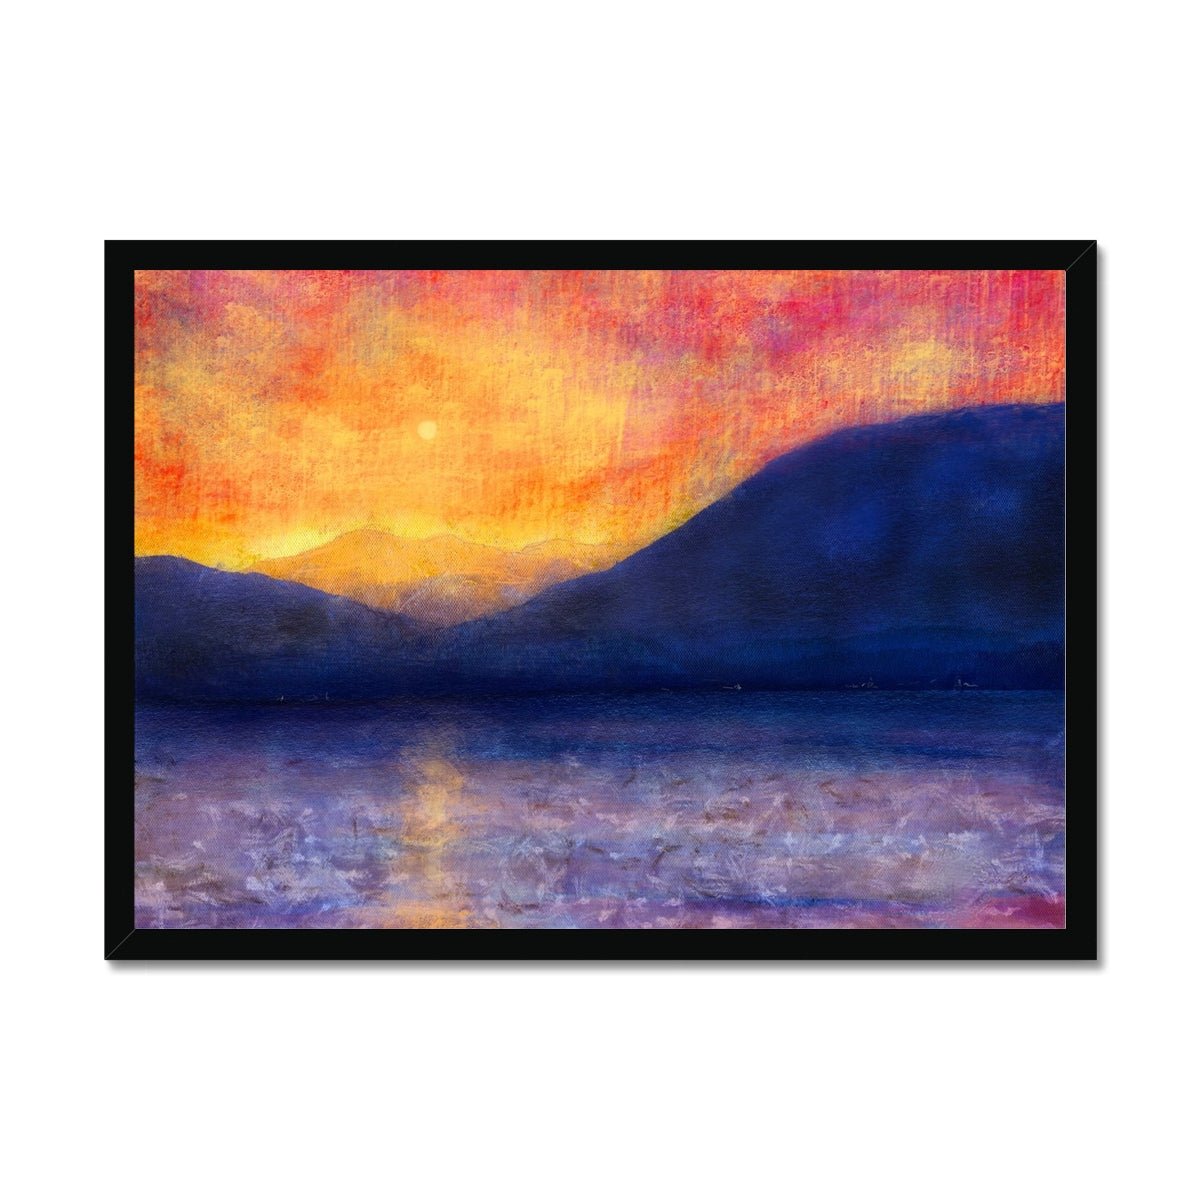 Sunset Approaching Mull Painting | Framed Prints From Scotland-Framed Prints-Hebridean Islands Art Gallery-A2 Landscape-Black Frame-Paintings, Prints, Homeware, Art Gifts From Scotland By Scottish Artist Kevin Hunter